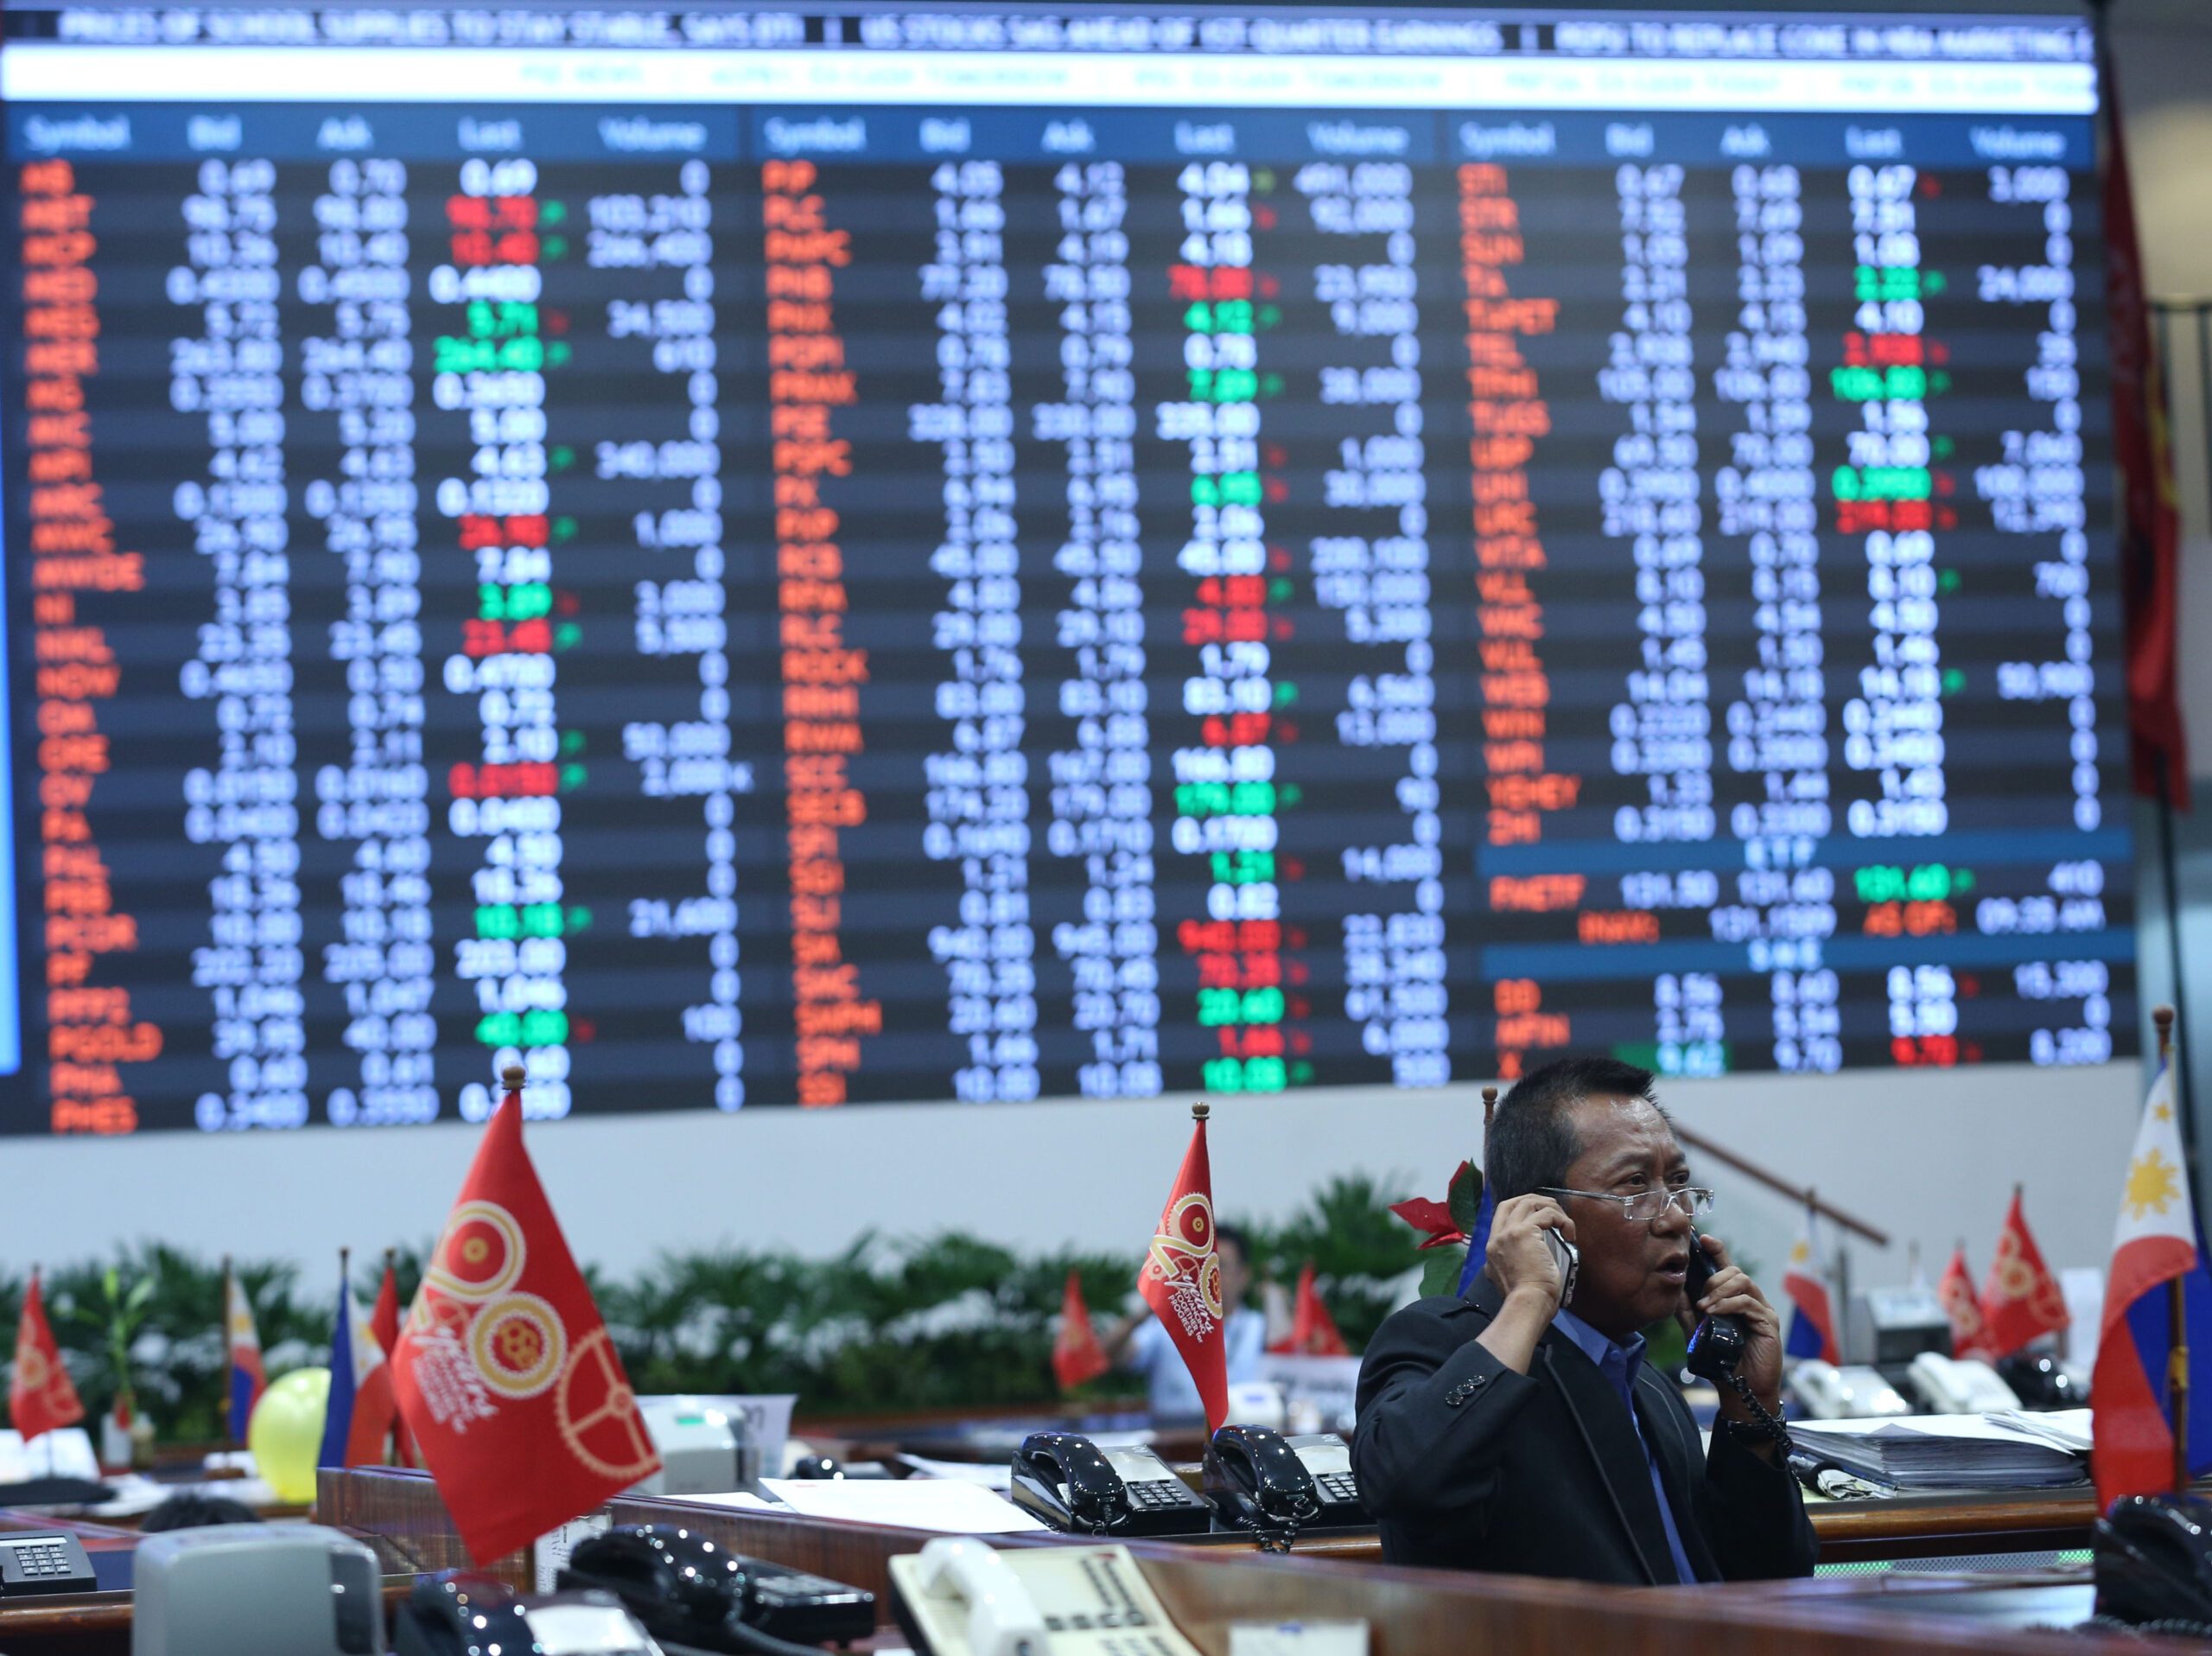 PSE’s 9-month income increases by 12%